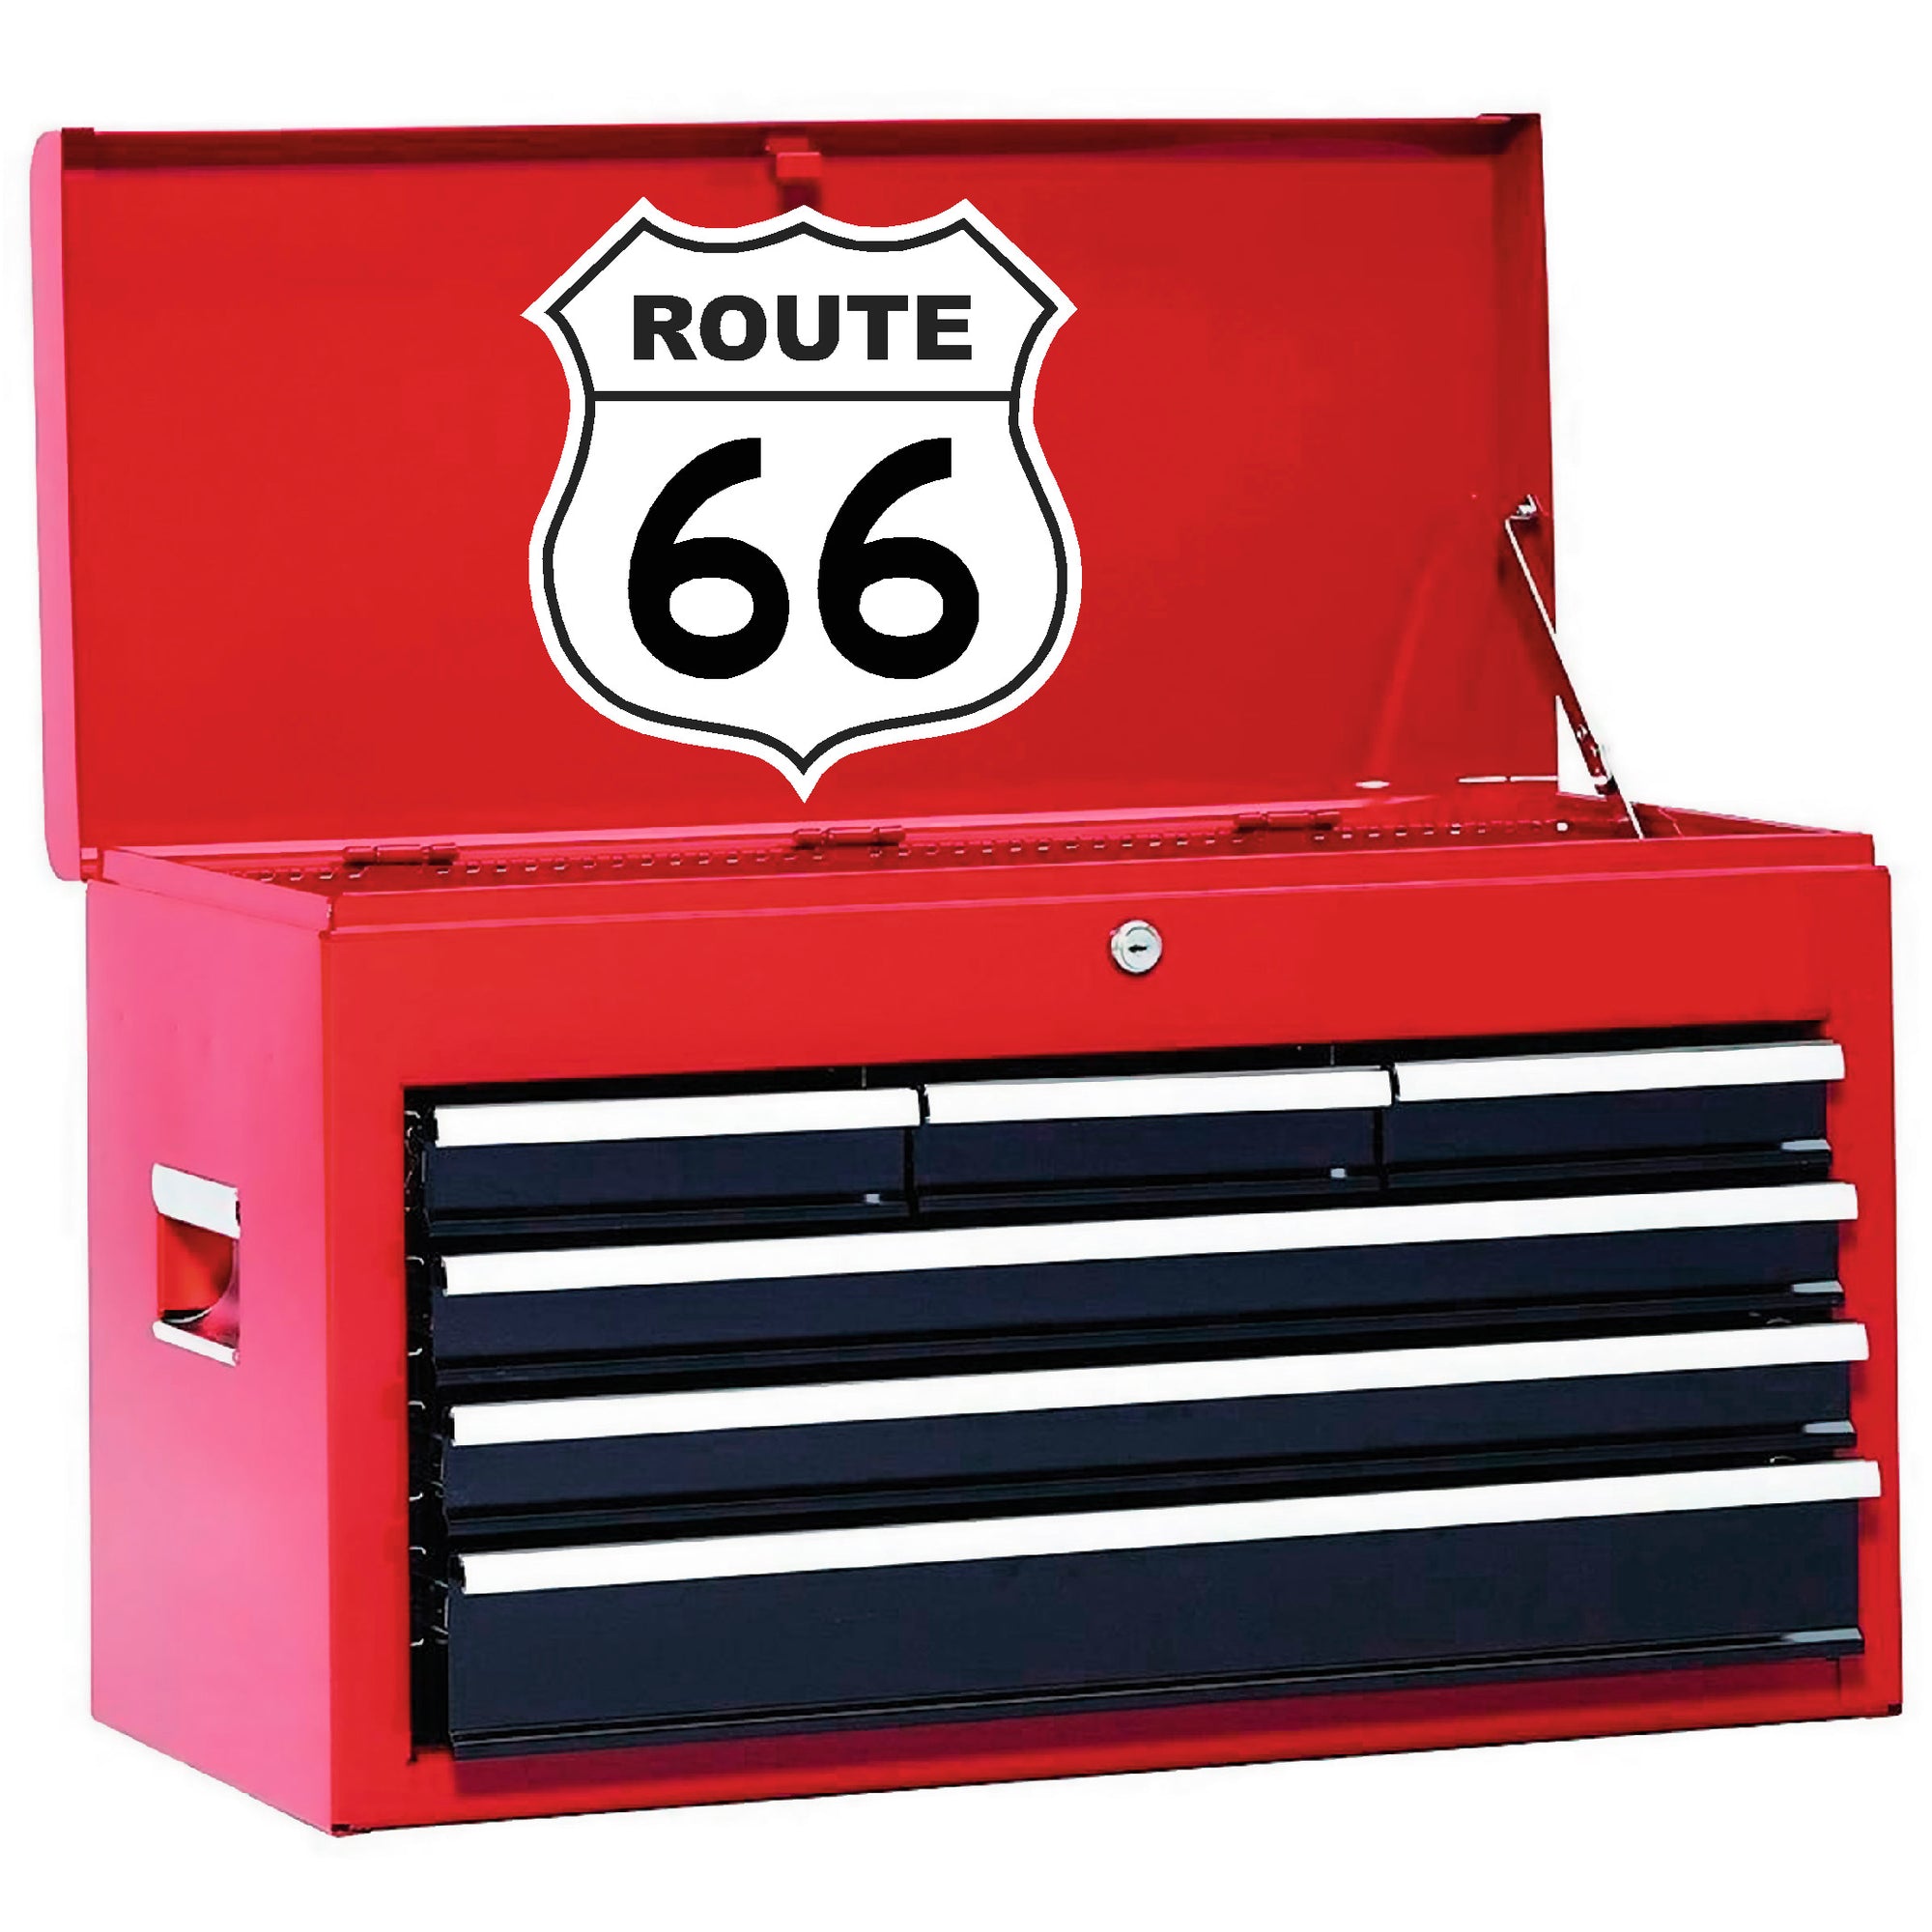 Route 66 road sign sticker